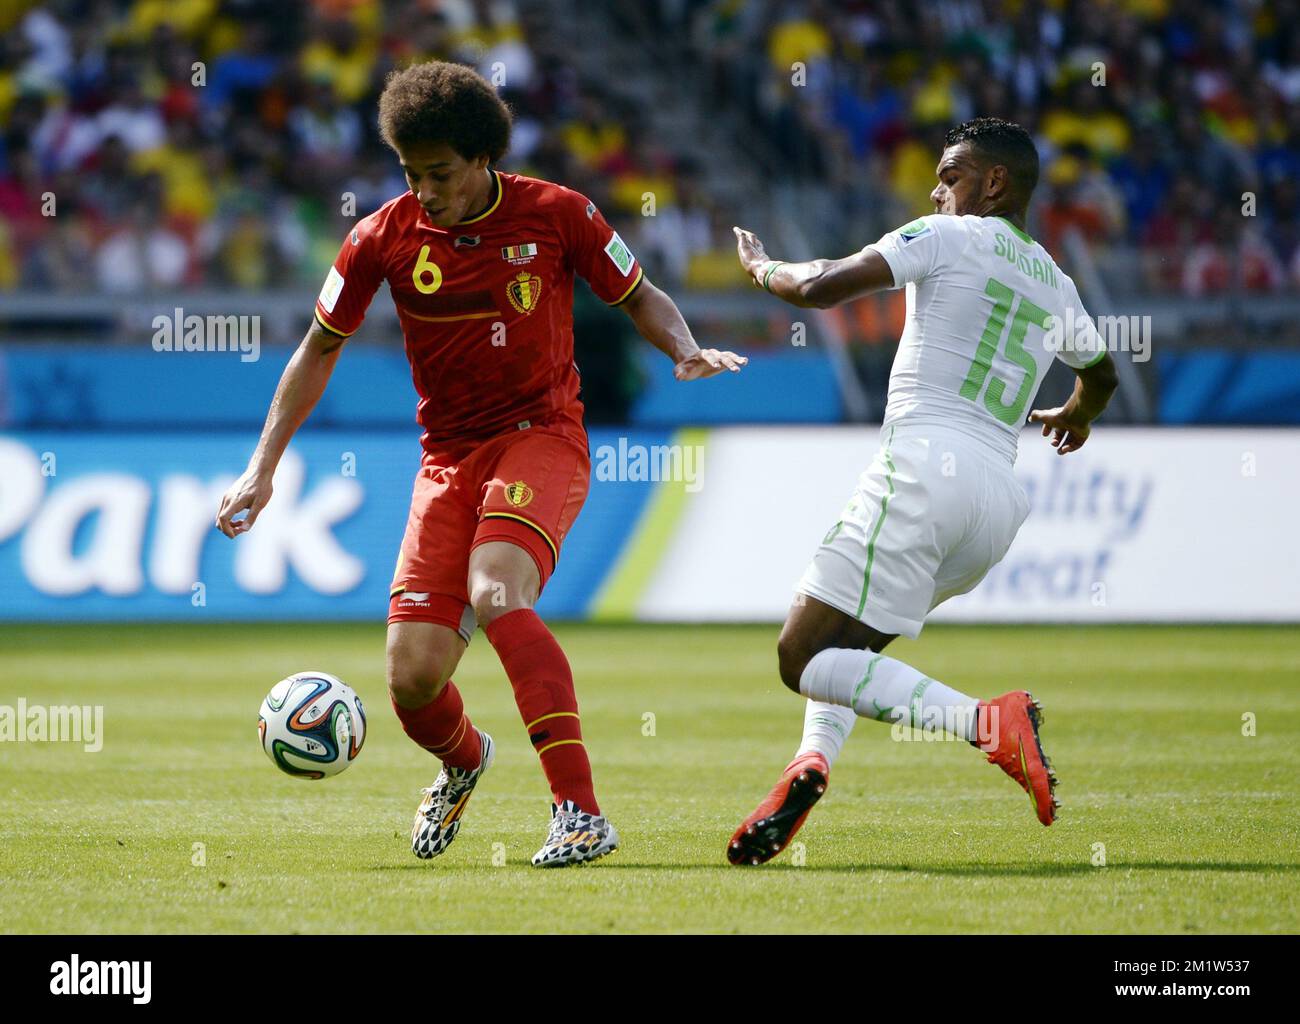 Belgium's Axel Witsel and Algeria's El Arbi Hillel Soudani fight for the ball during a soccer game between Belgian national team The Red Devils and Algeria in Belo Horizonte, Brazil, the first game in Group H of the first round of the 2014 FIFA World Cup, Tuesday 17 June 2014.  Stock Photo